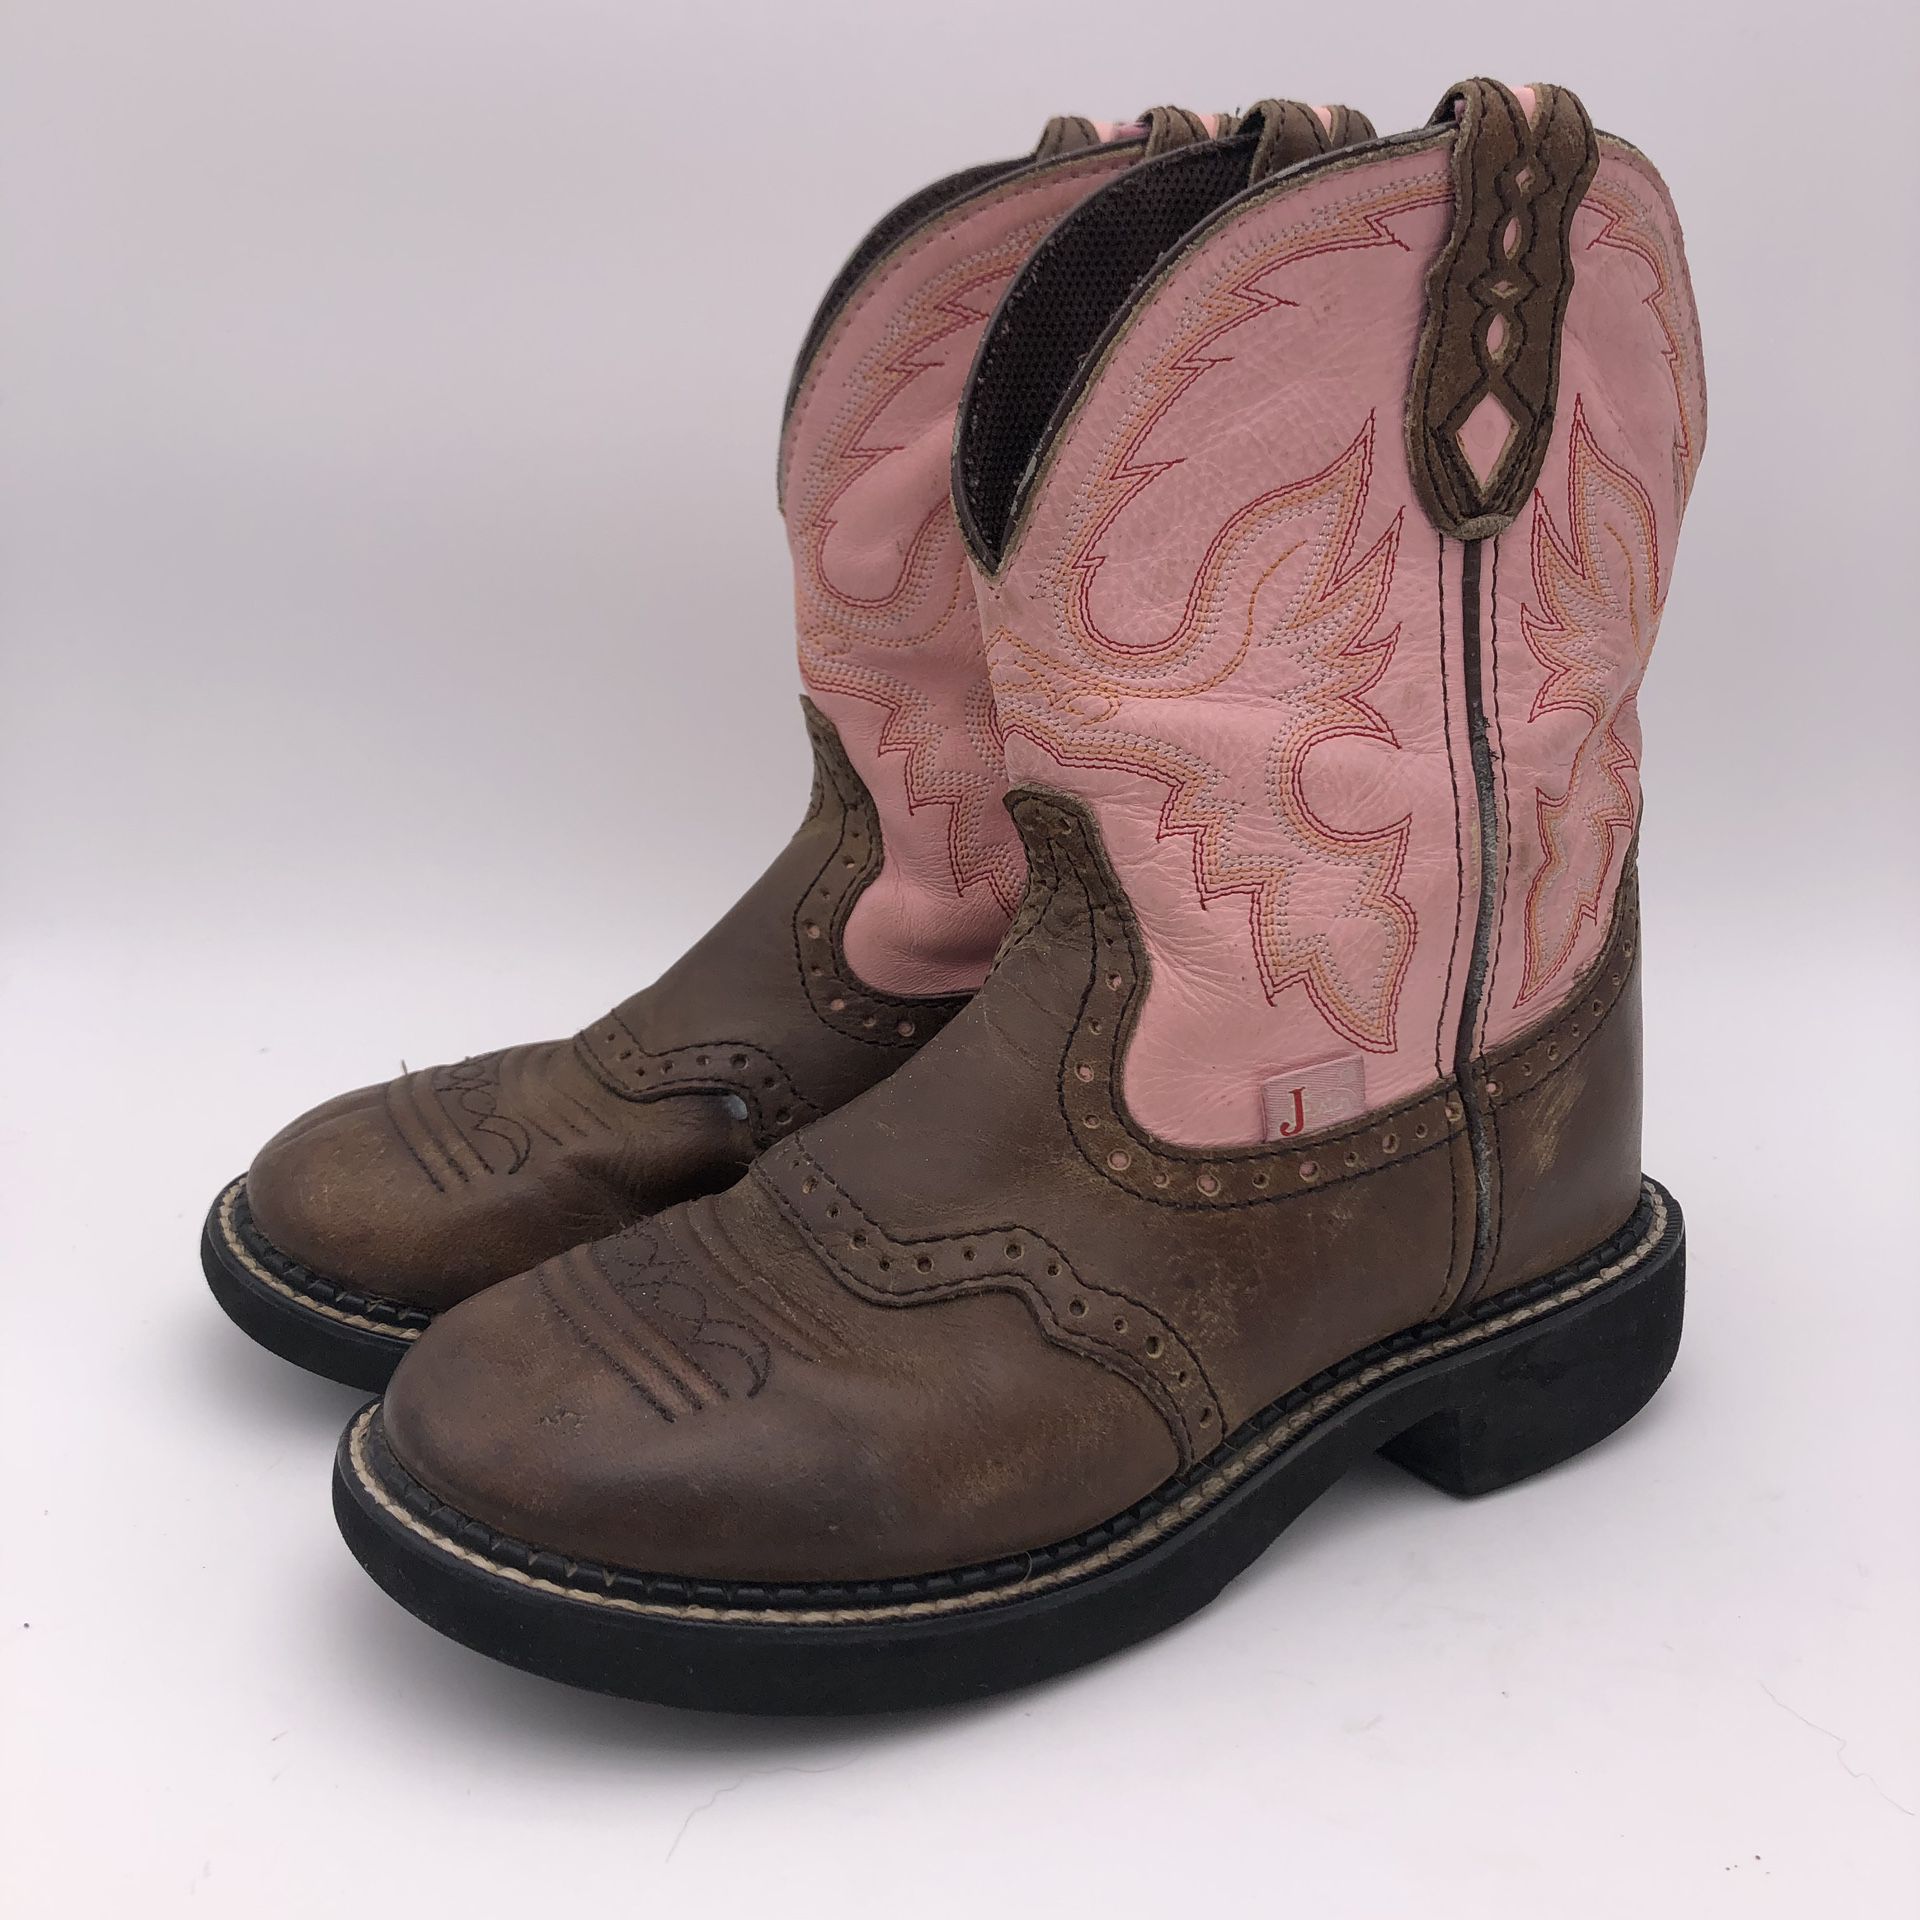 Justin Gypsy Boots Women’s Size 6 Pink/Brown Leather